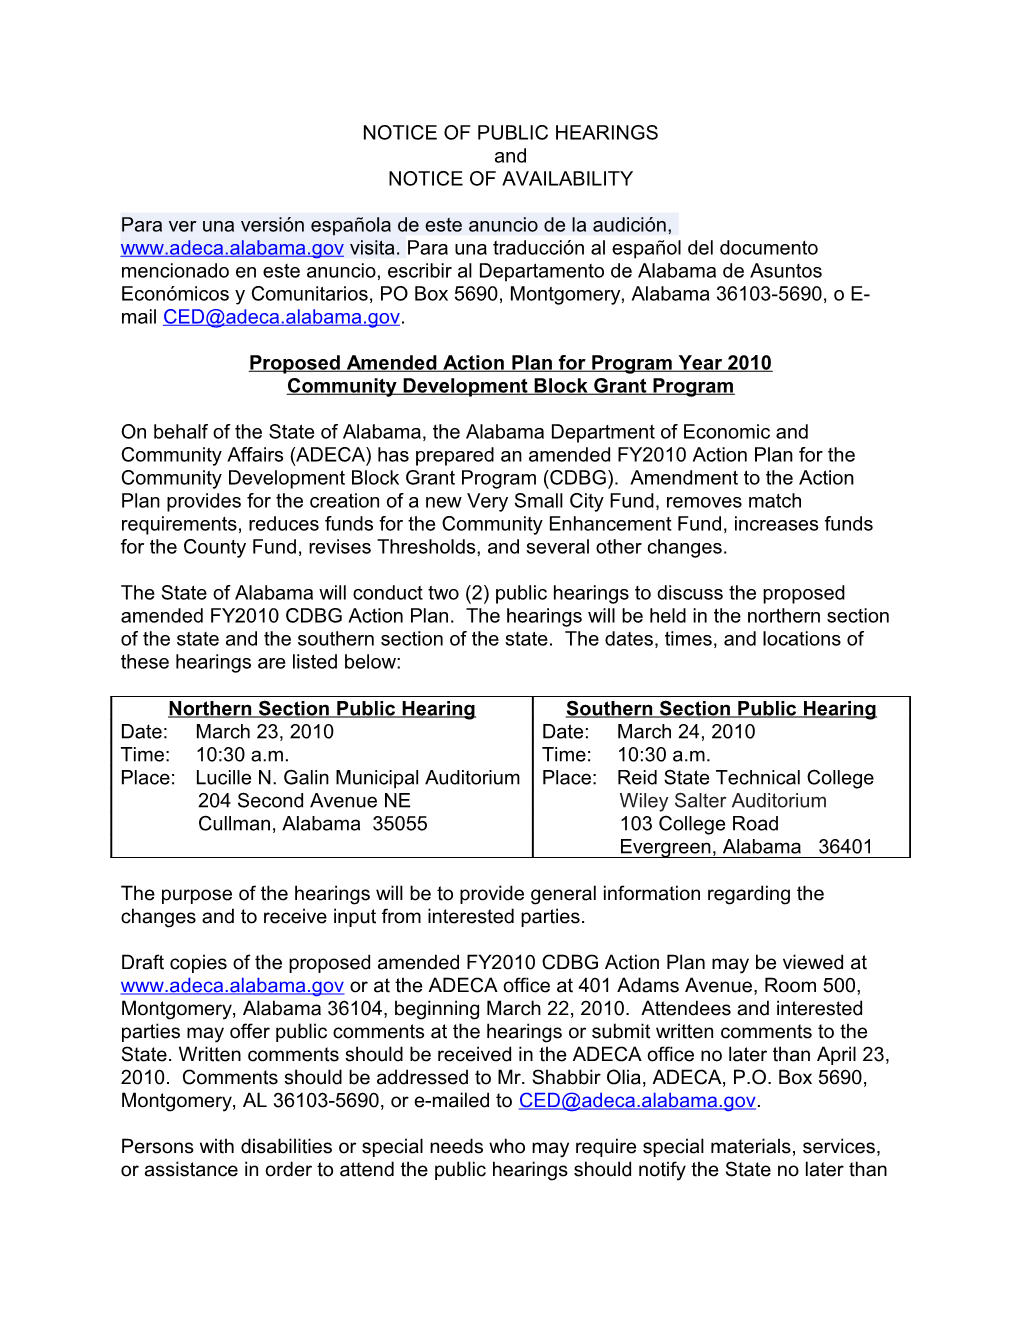 2010 - Newspaper Ad - Amended PY 2010 CDBG Action Plan - Maureen's Copy (2)